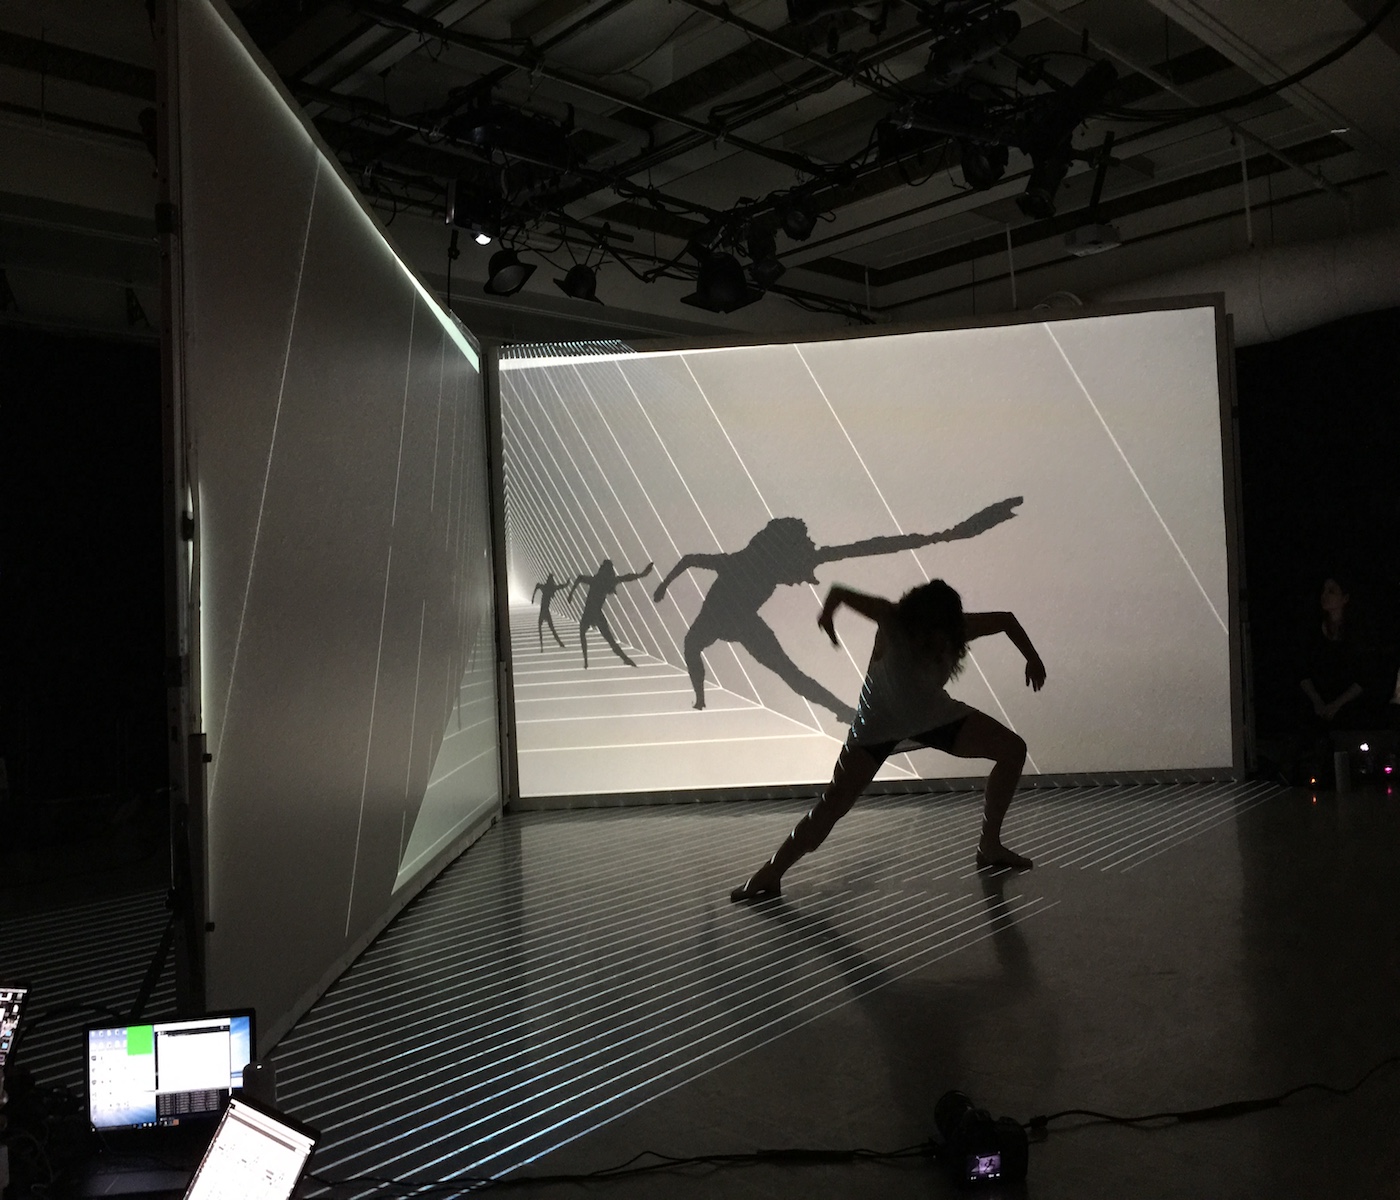 Dance and ITP collaborate to create visual imagery through the use of video projections and motion capture.